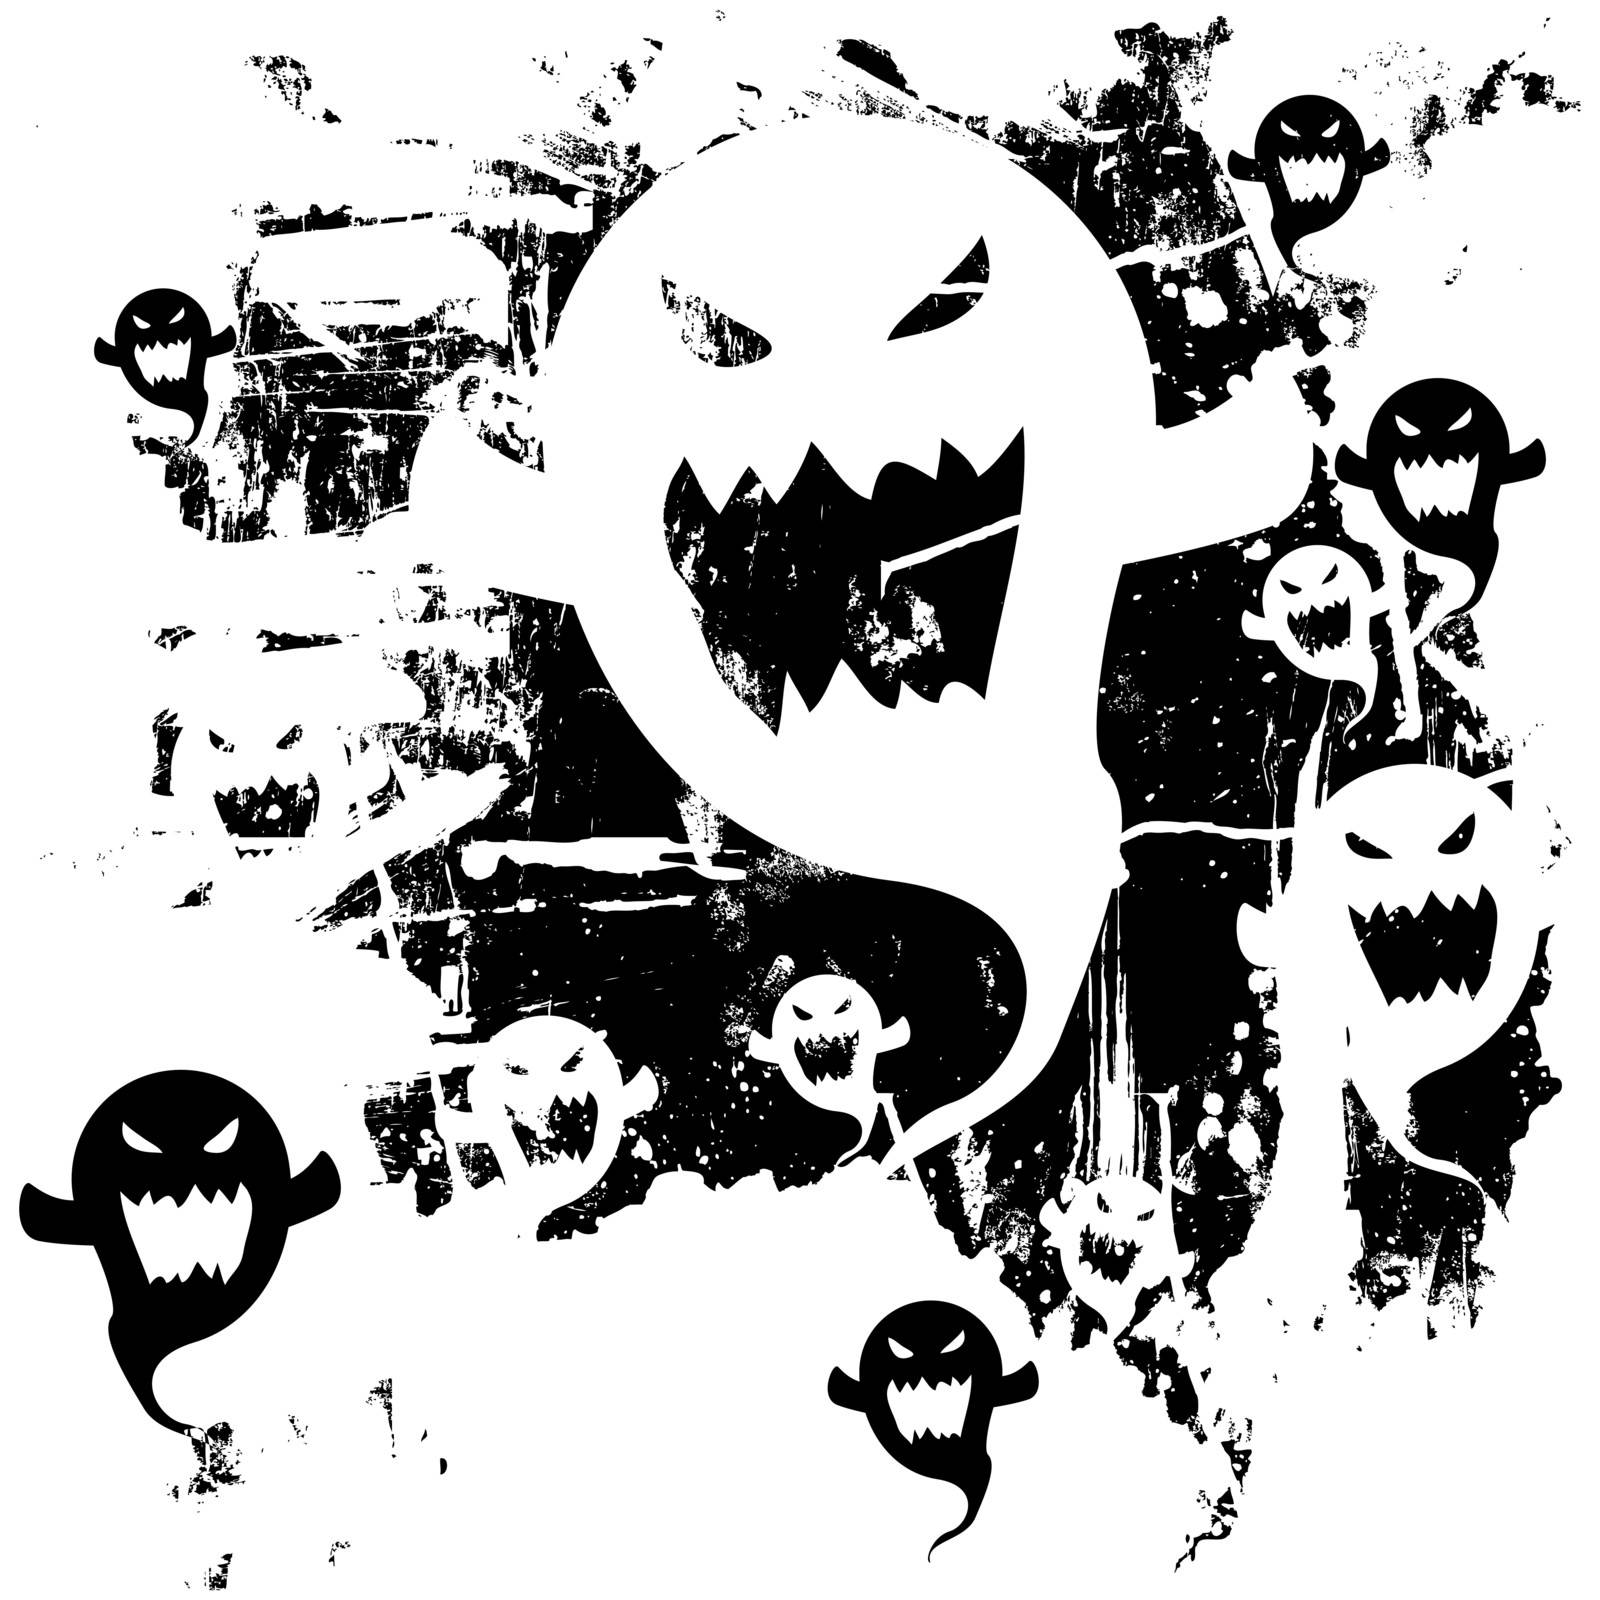 Scary ghost background. Distressed, grunge look. Ghost can also be used as a separate icon.